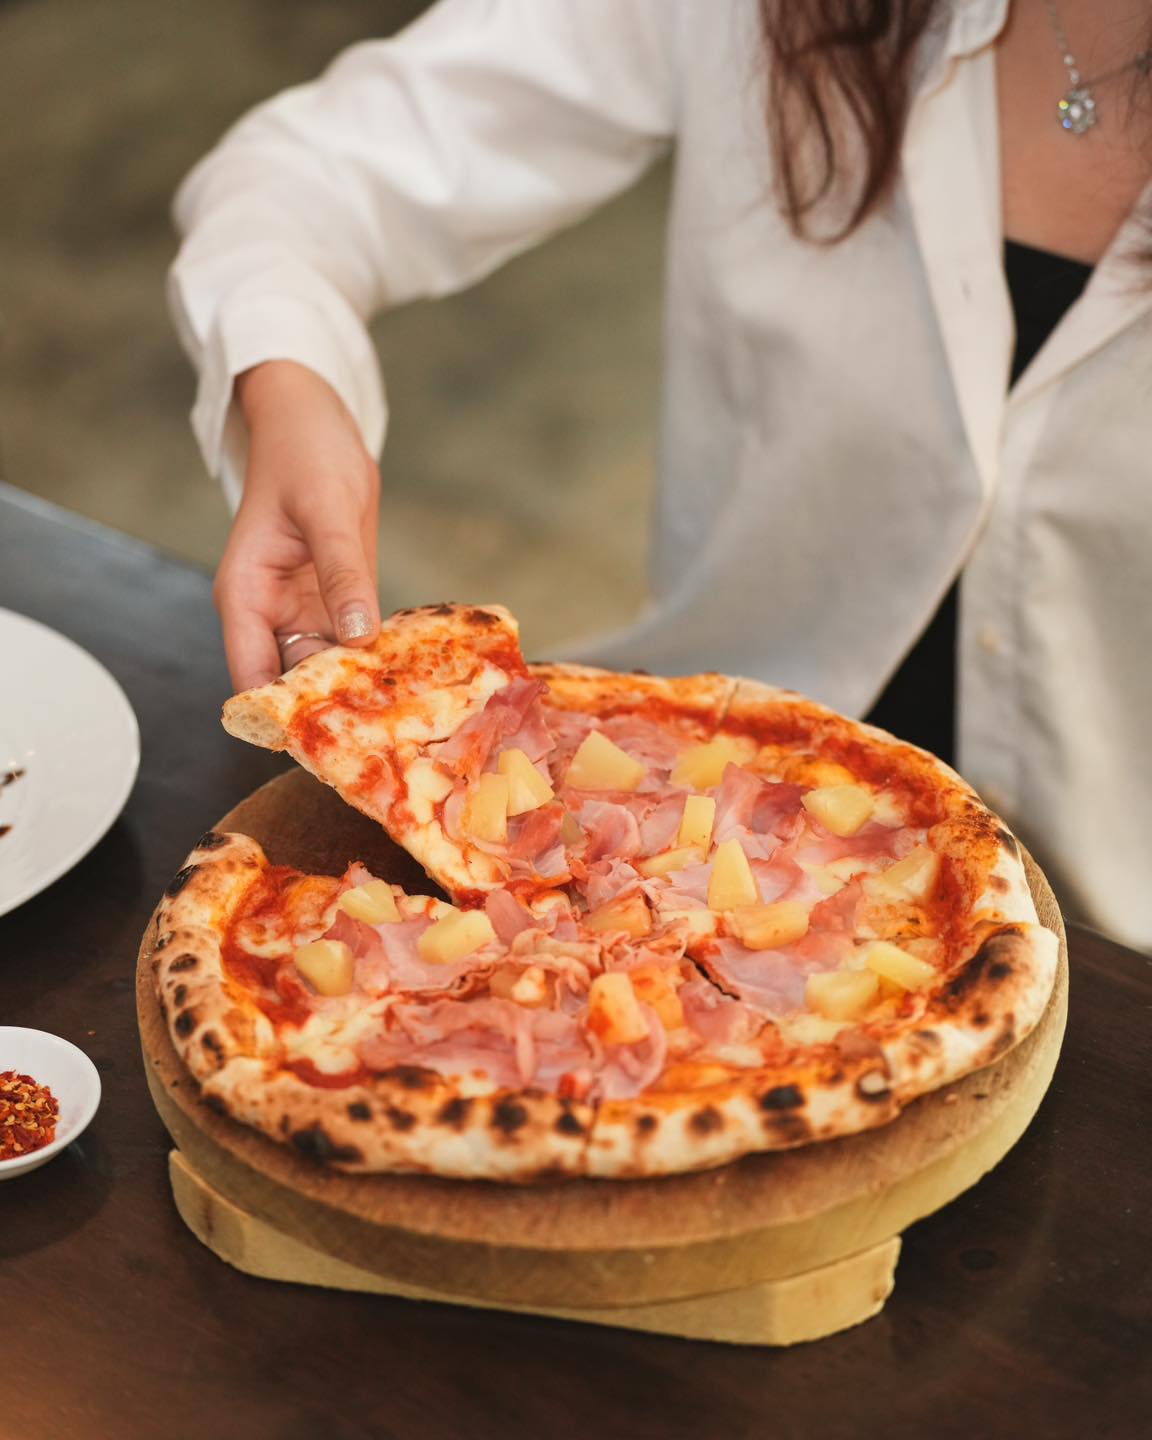 Lobang: FREE PIZZAS at La Pizzaiola in celebration of the new outlet at Bukit Timah - 15, 23, 29 April only - 5